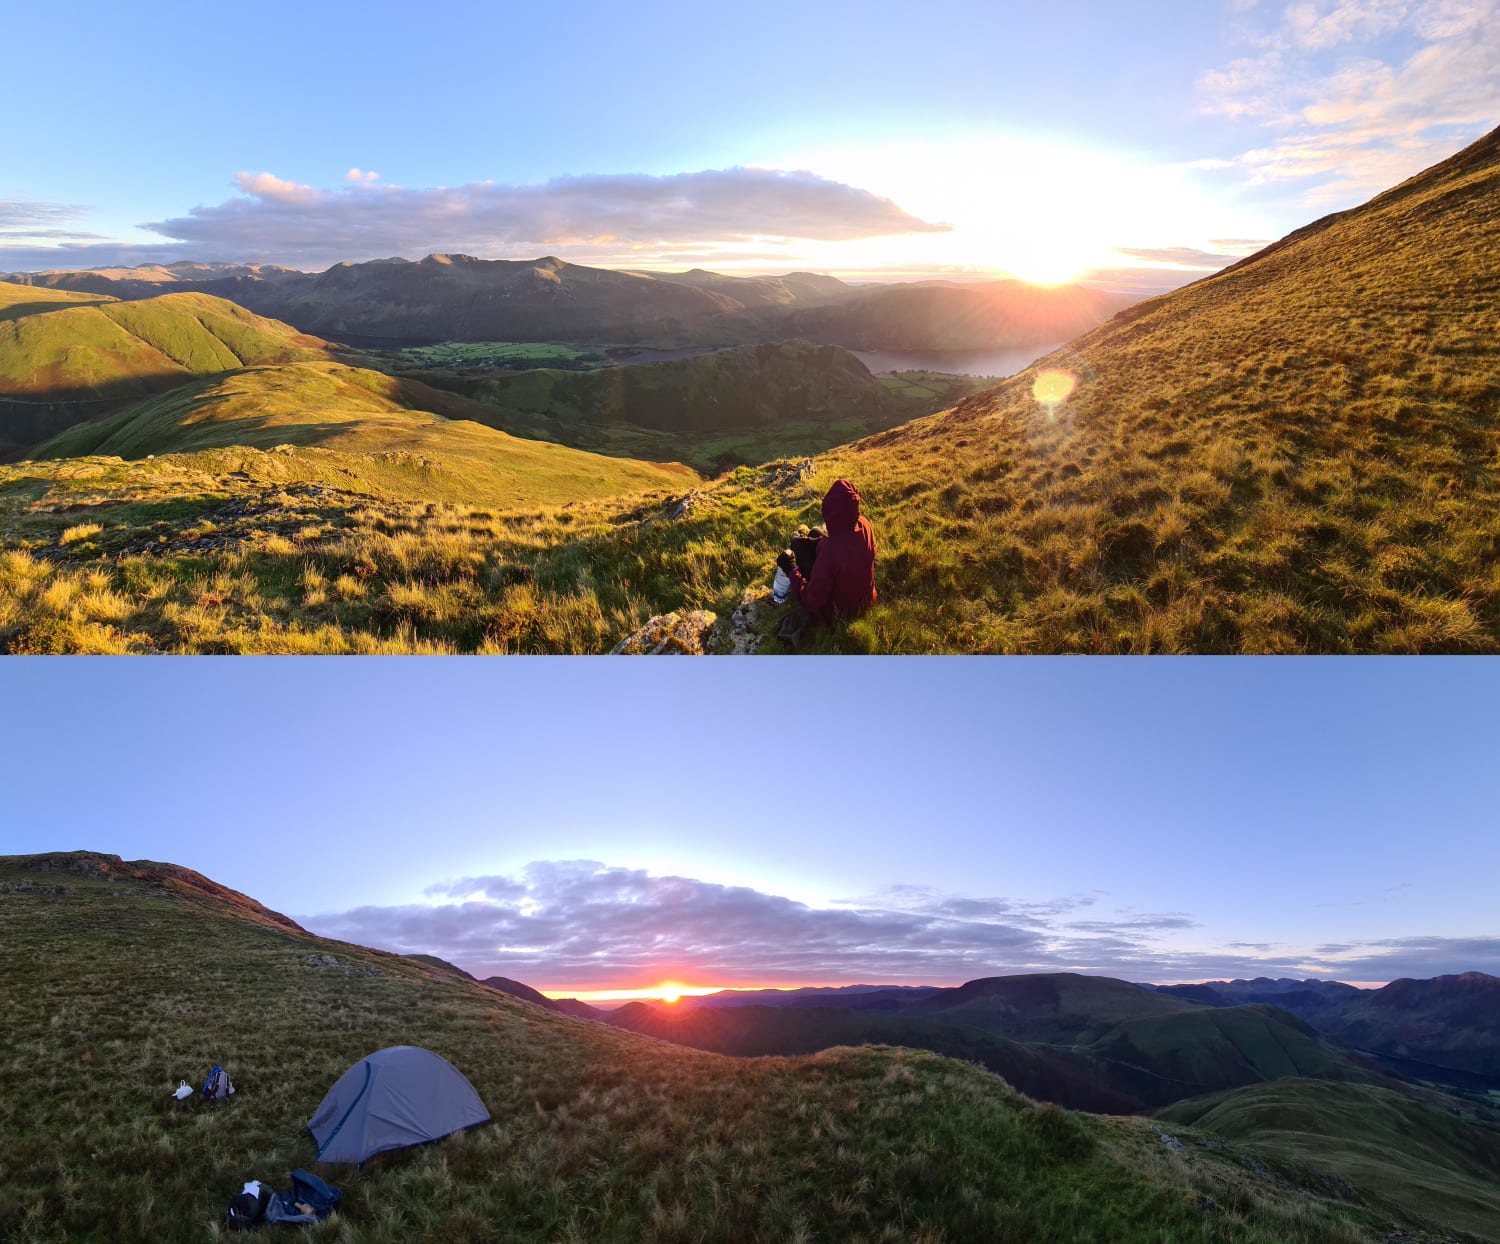 Went wild camping in the Lake District over bank holiday - sunset and sunrise at 2000 feet up Whiteless Pike was incredible